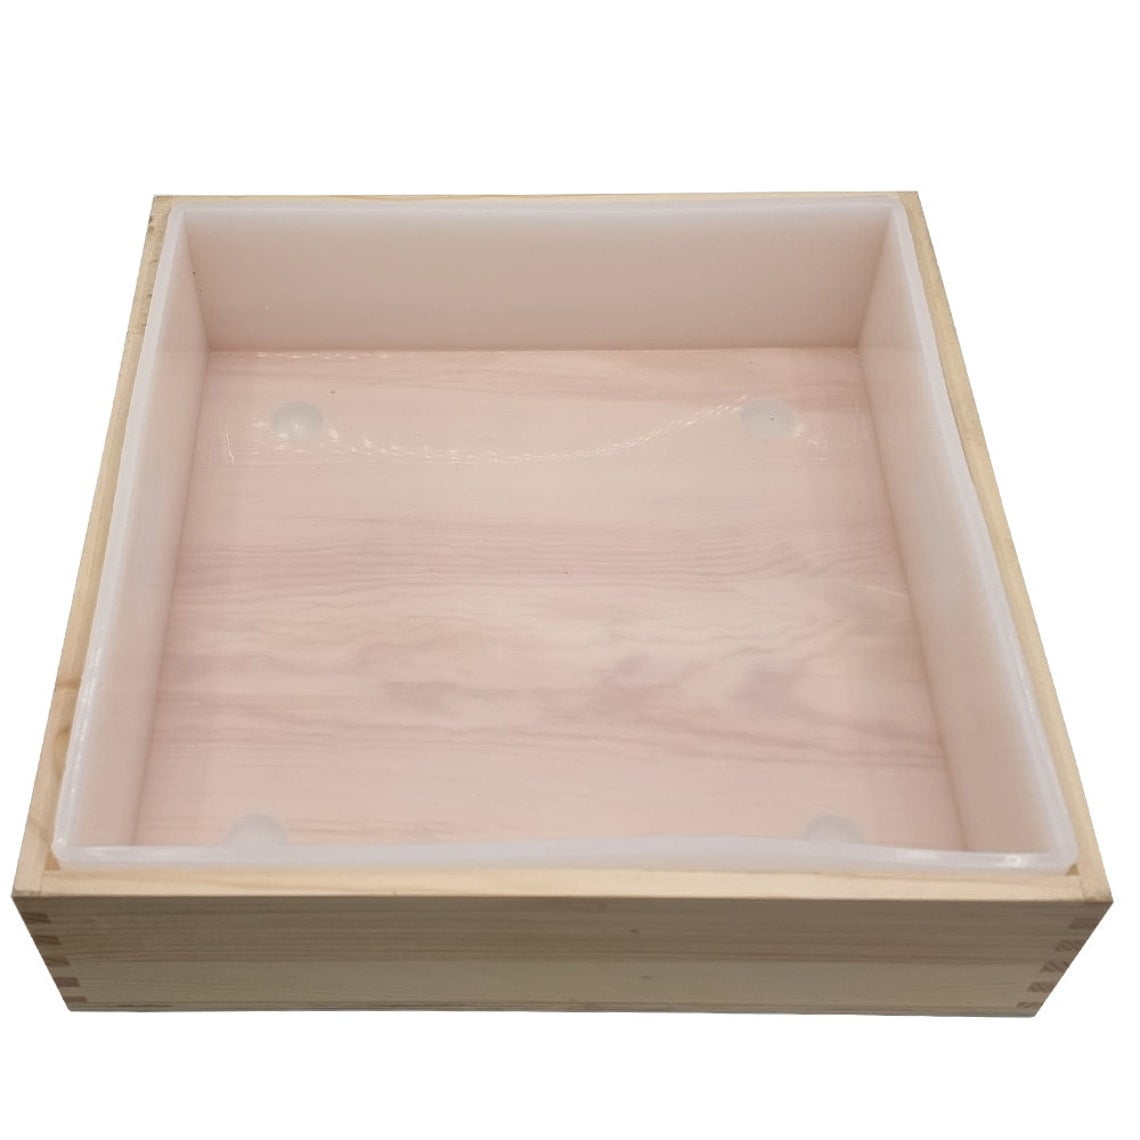 Large-Square-wooden-mould-with-Lid-open.jpg